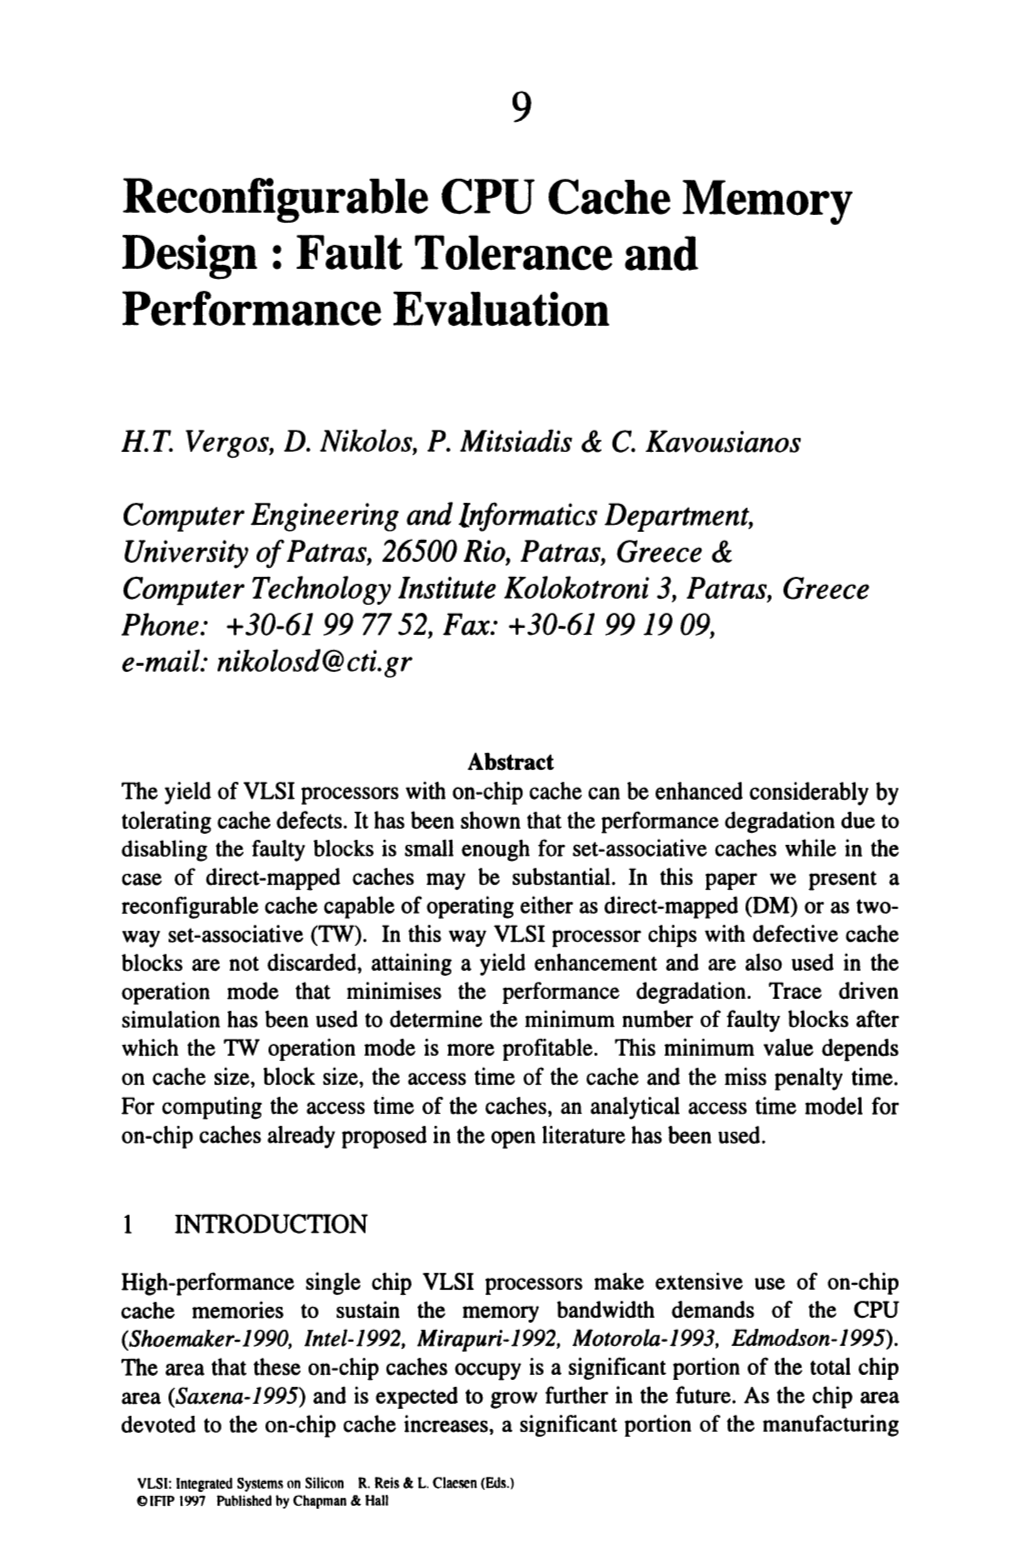 Reconfigurable CPU Cache Memory Design : Fault Tolerance and Performance Evaluation